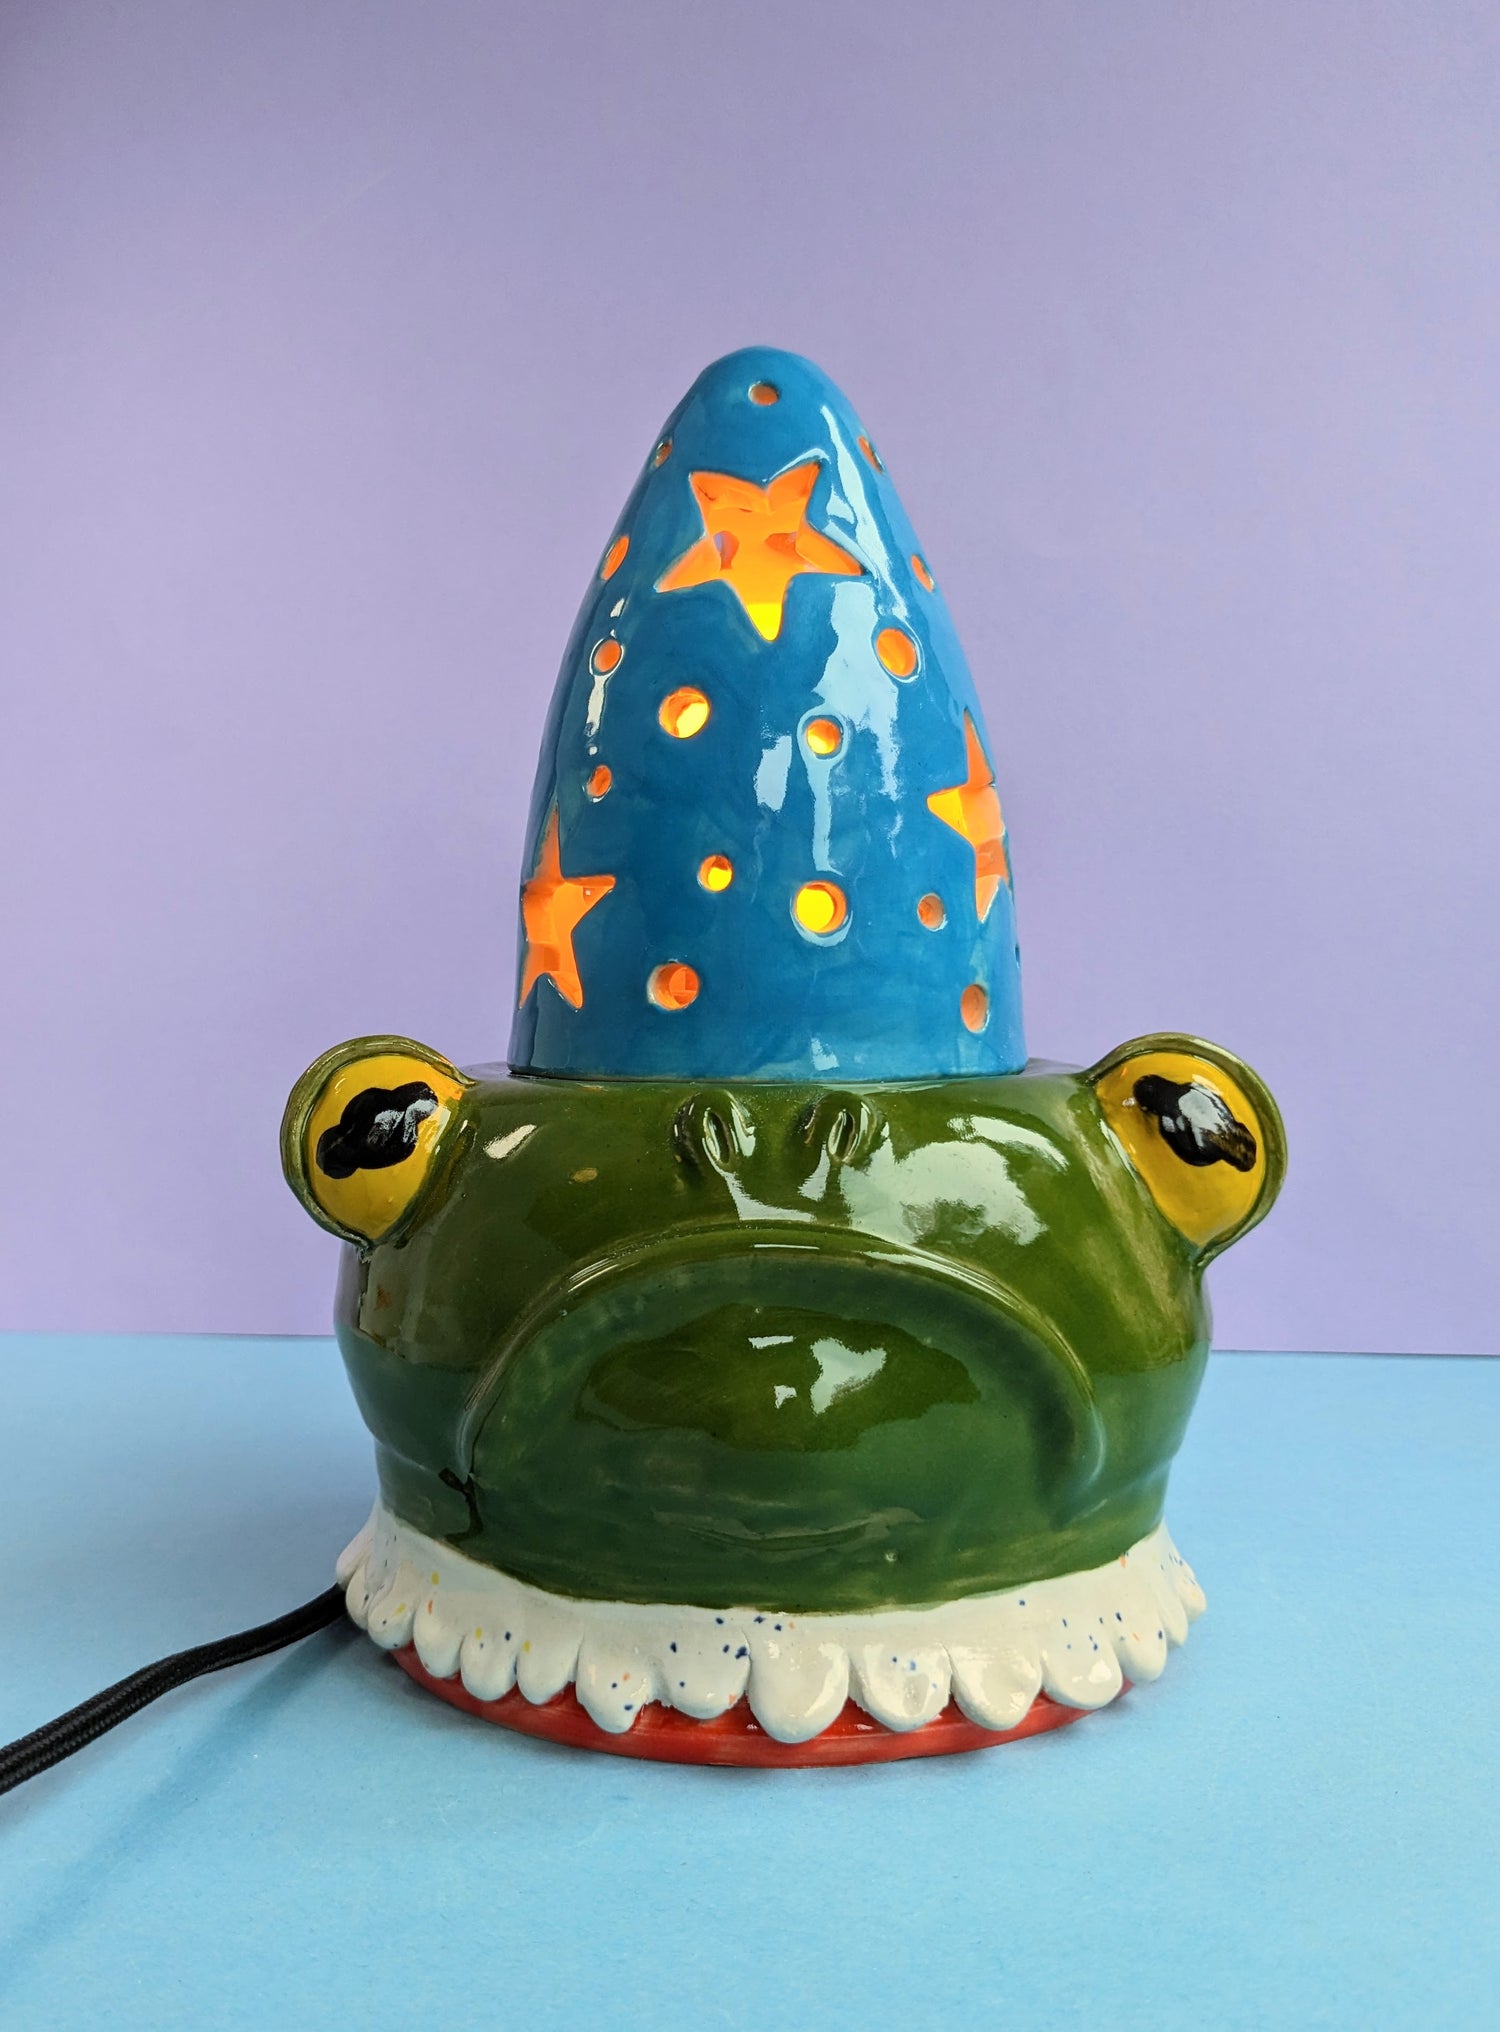 Ceramic Frog wizard lamp featuring a light blue hat with glowing stars, a dark green frowning frog base that has a white ruffle collar.